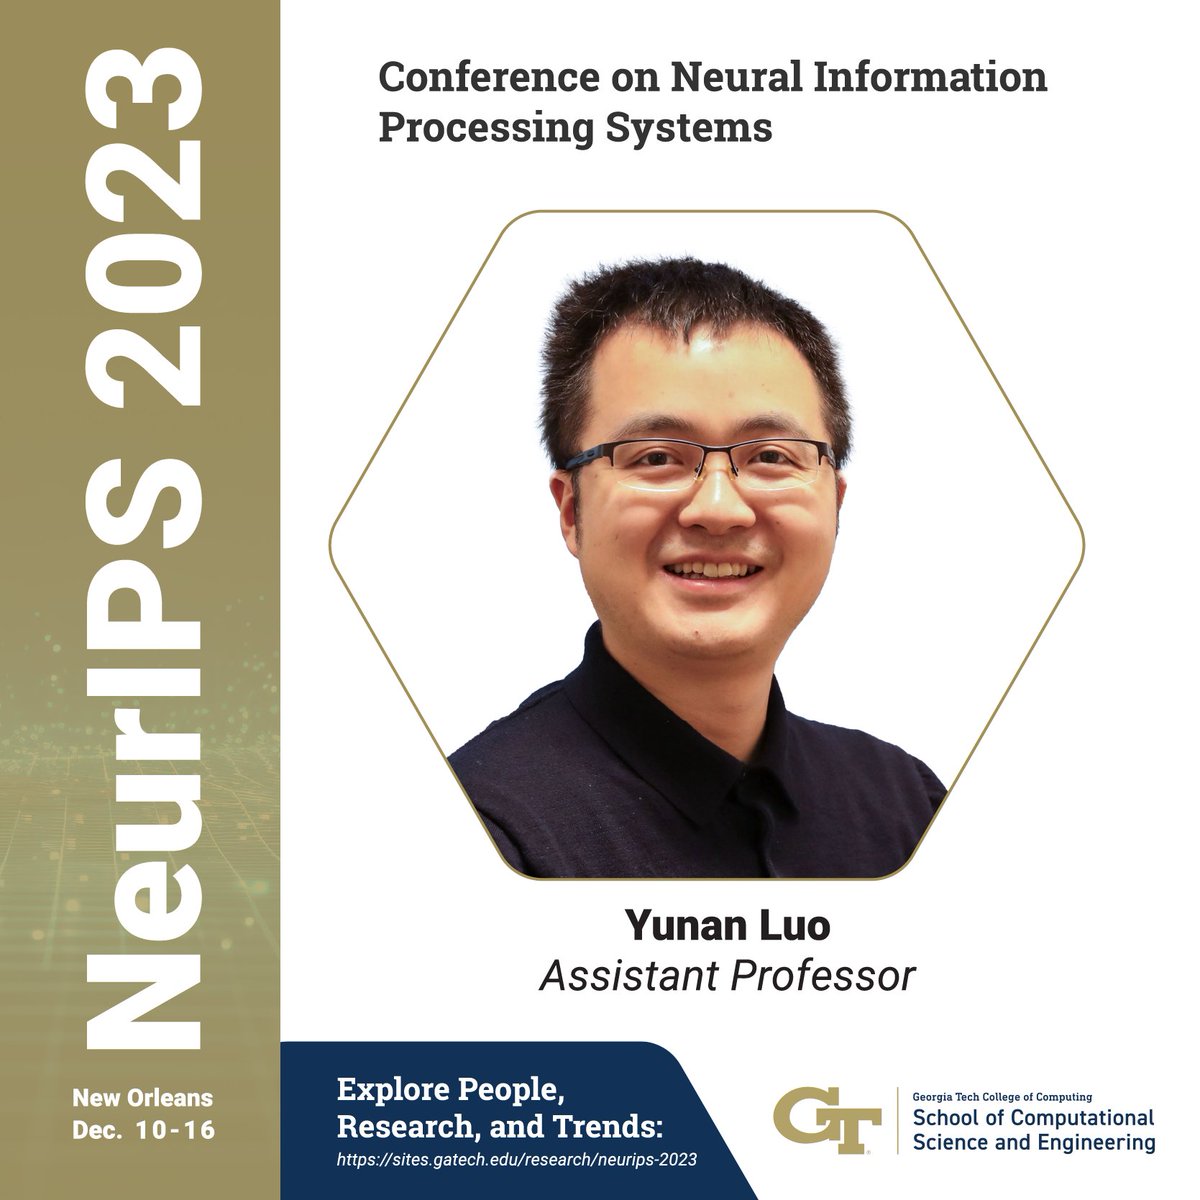 After recently receiving a $1.8M @NIH grant, Yunan Luo is at #NeurIPS2023 presenting research selected as a spotlight paper! Here is a refresher on Luo, the grant, and the computational biology research that his group studies: cc.gatech.edu/news/faculty-u…